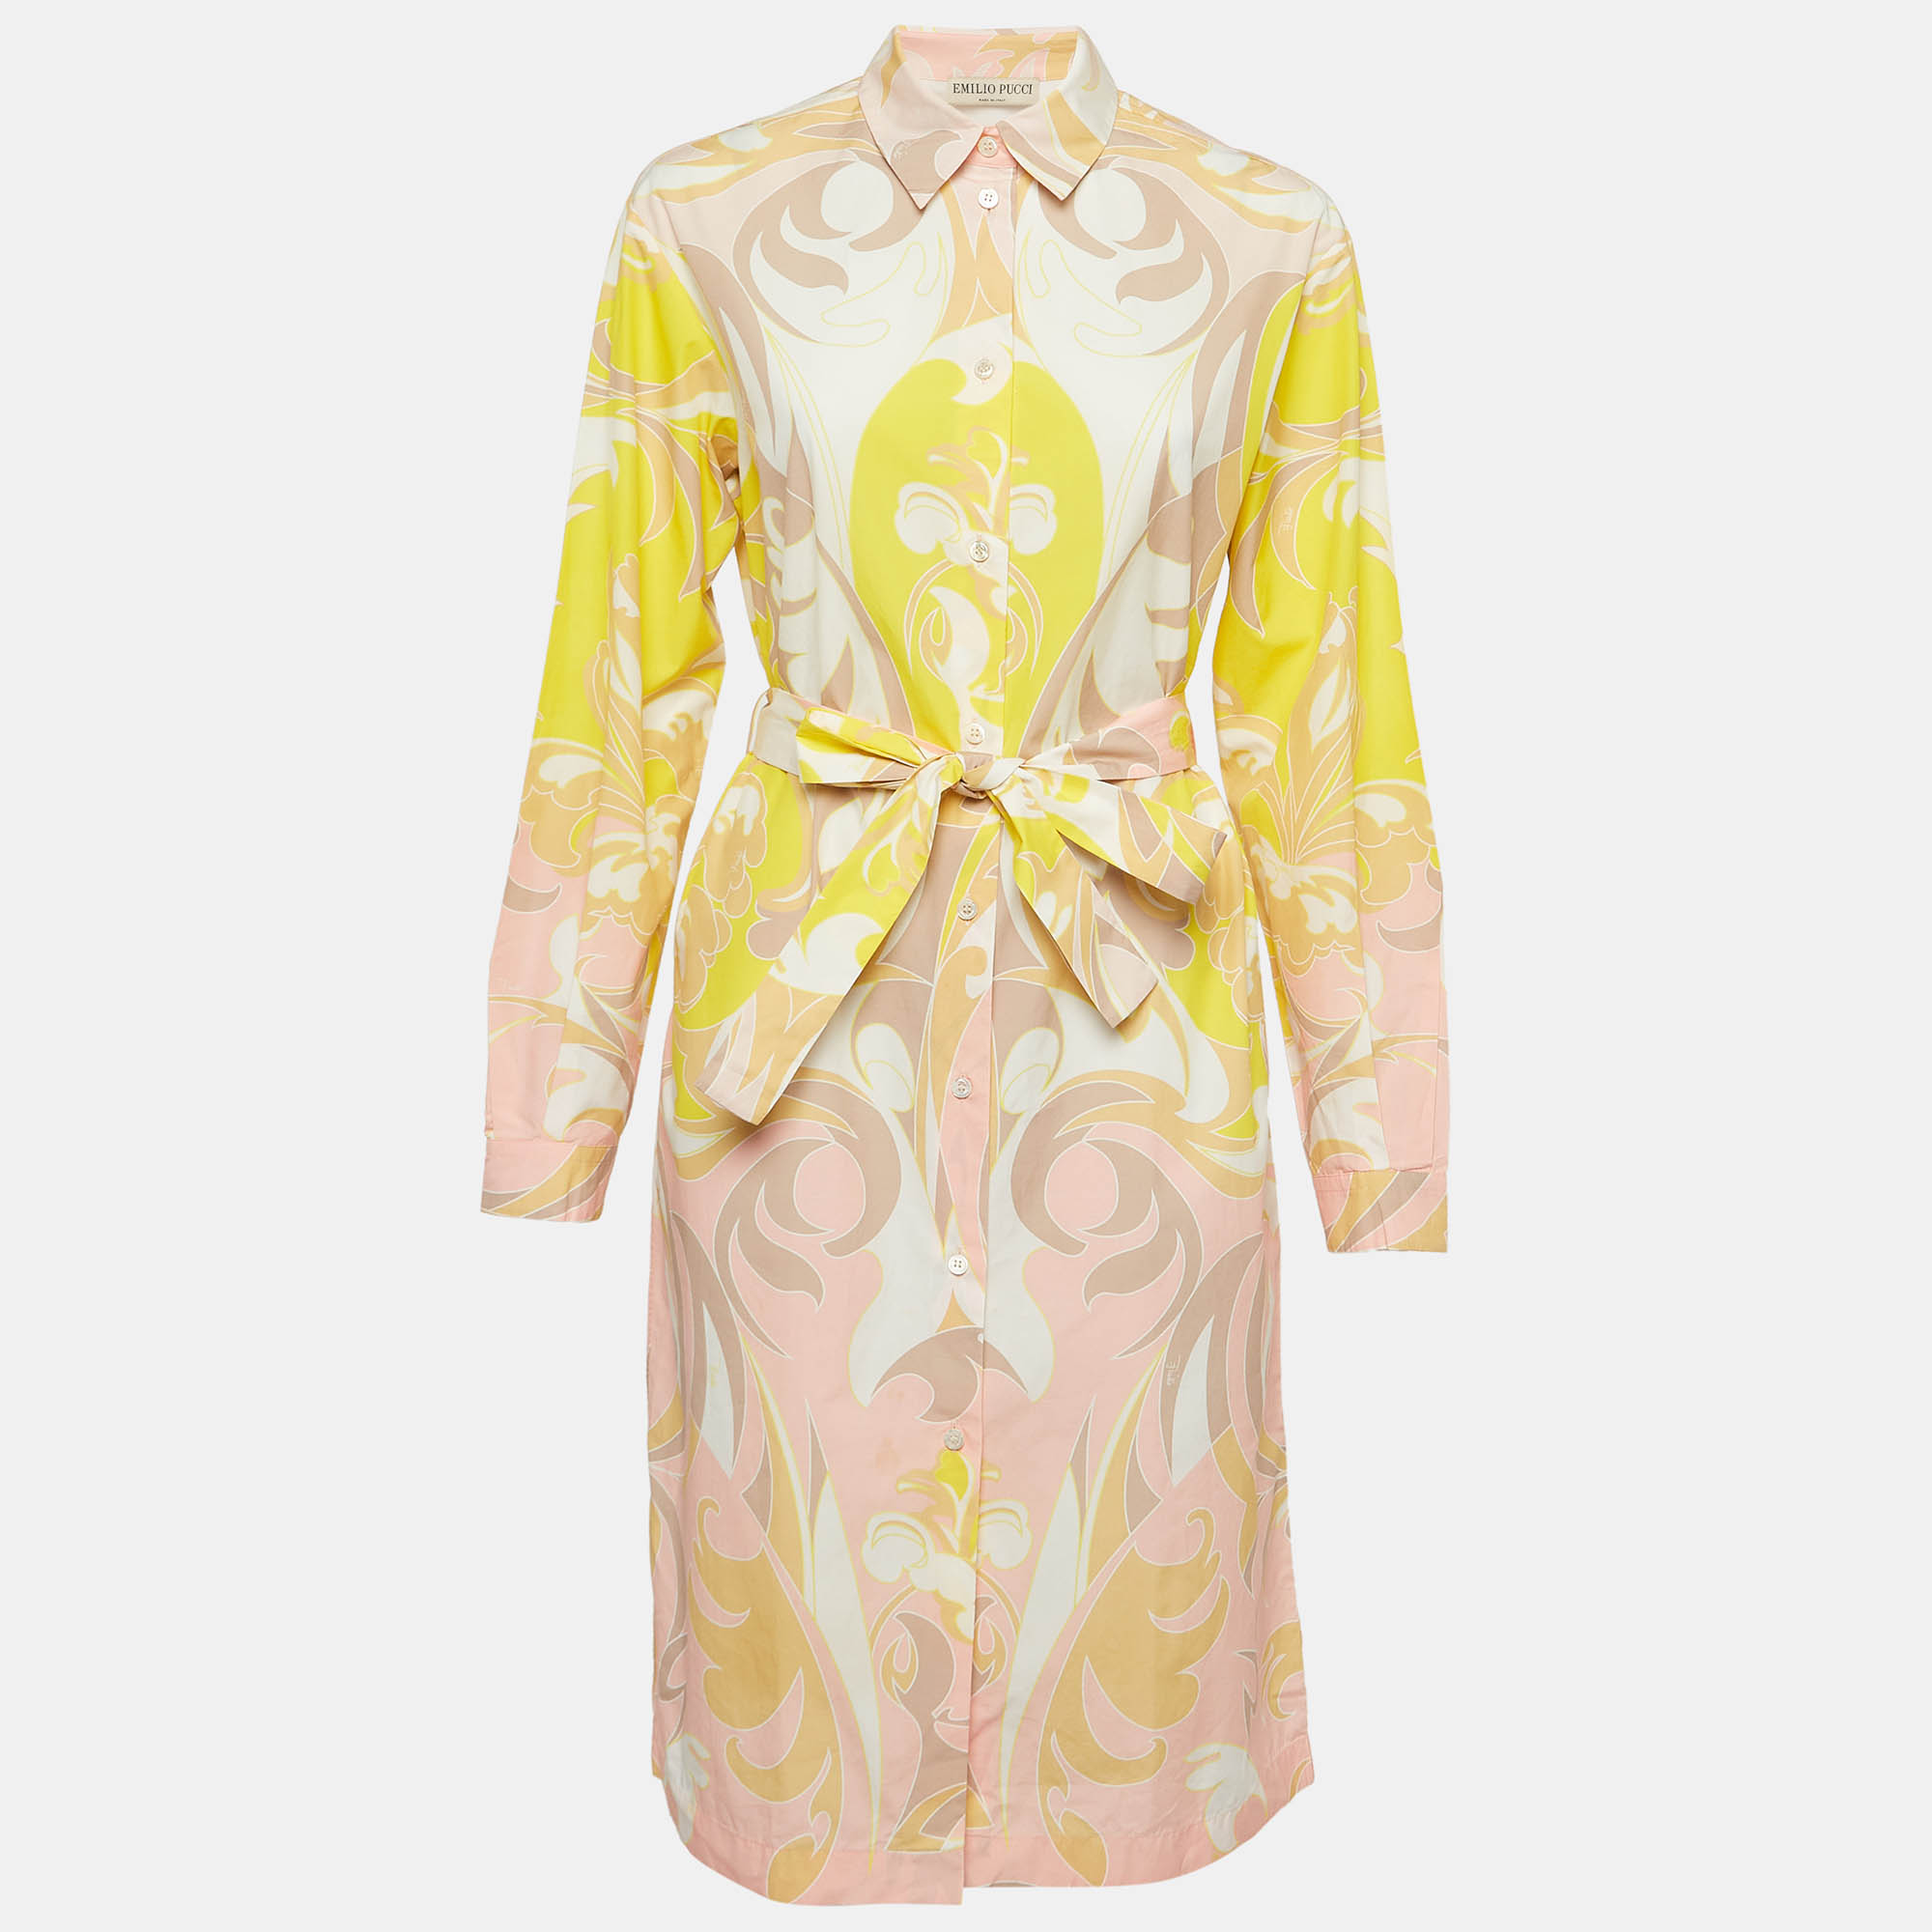 Pre-owned Emilio Pucci Multicolor Printed Cotton Belted Shirt Dress M